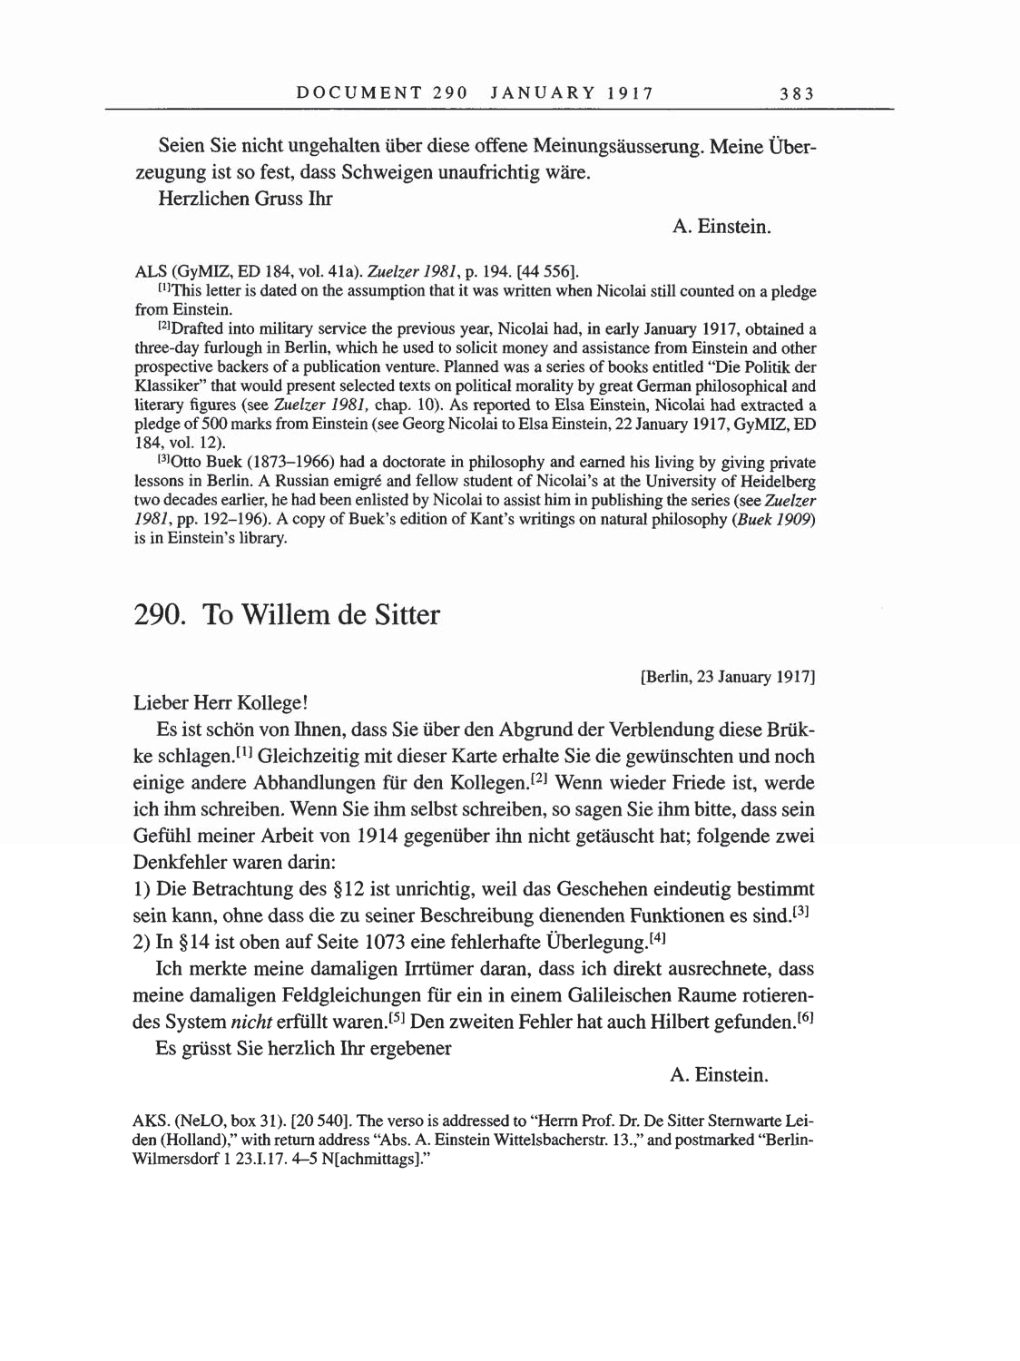 Volume 8, Part A: The Berlin Years: Correspondence 1914-1917 page 383